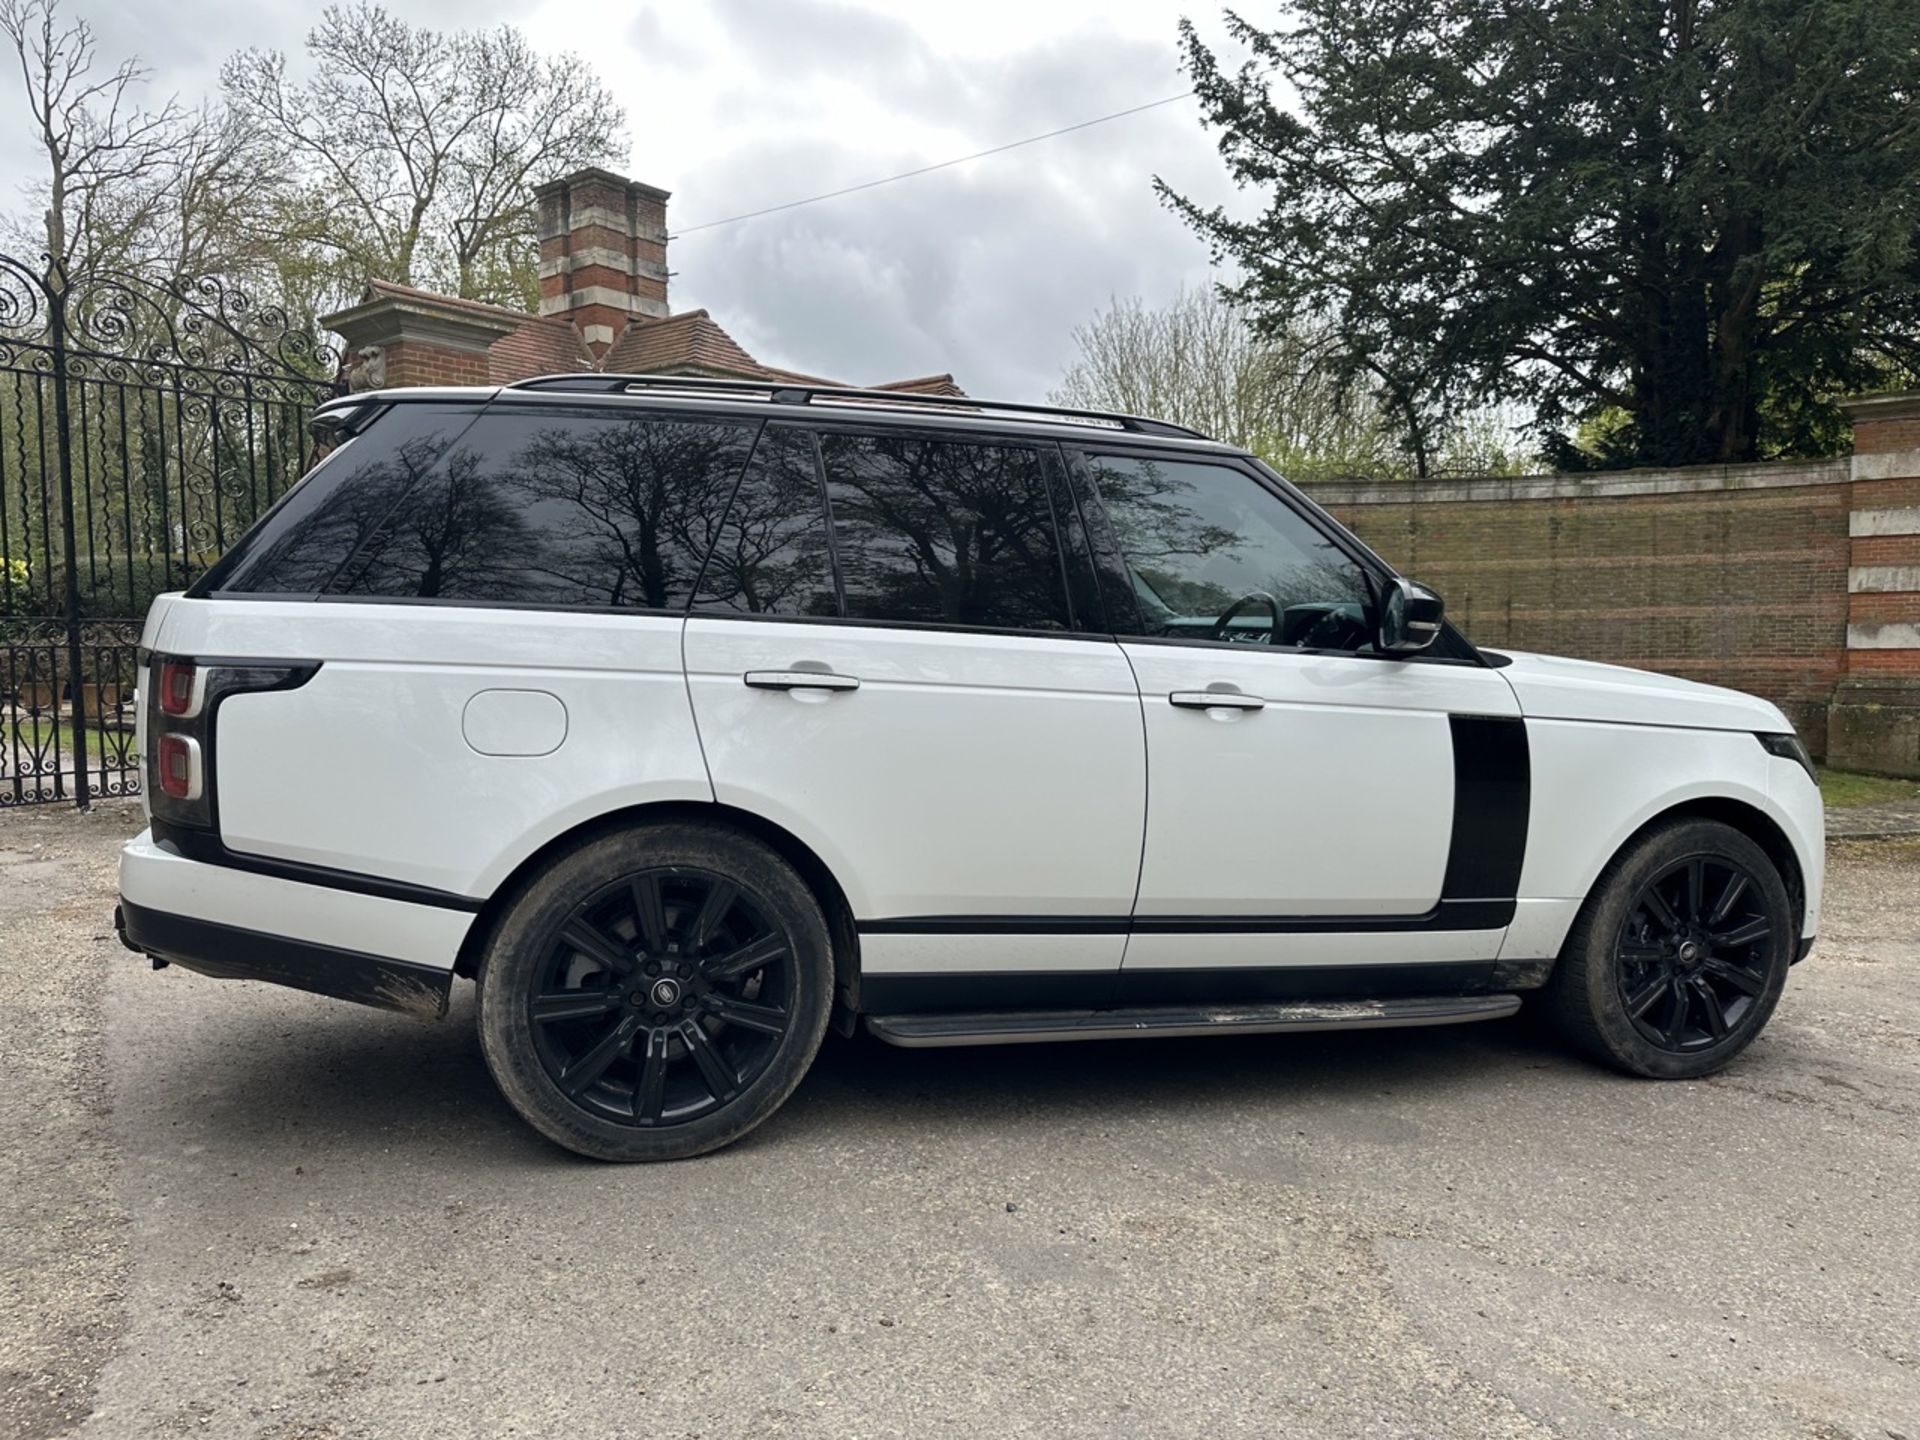 LAND ROVER RANGE ROVER 2.0 P400e Autobiography 4dr Auto - Automatic - 2018 - 31k miles - FULL SH - Image 4 of 22